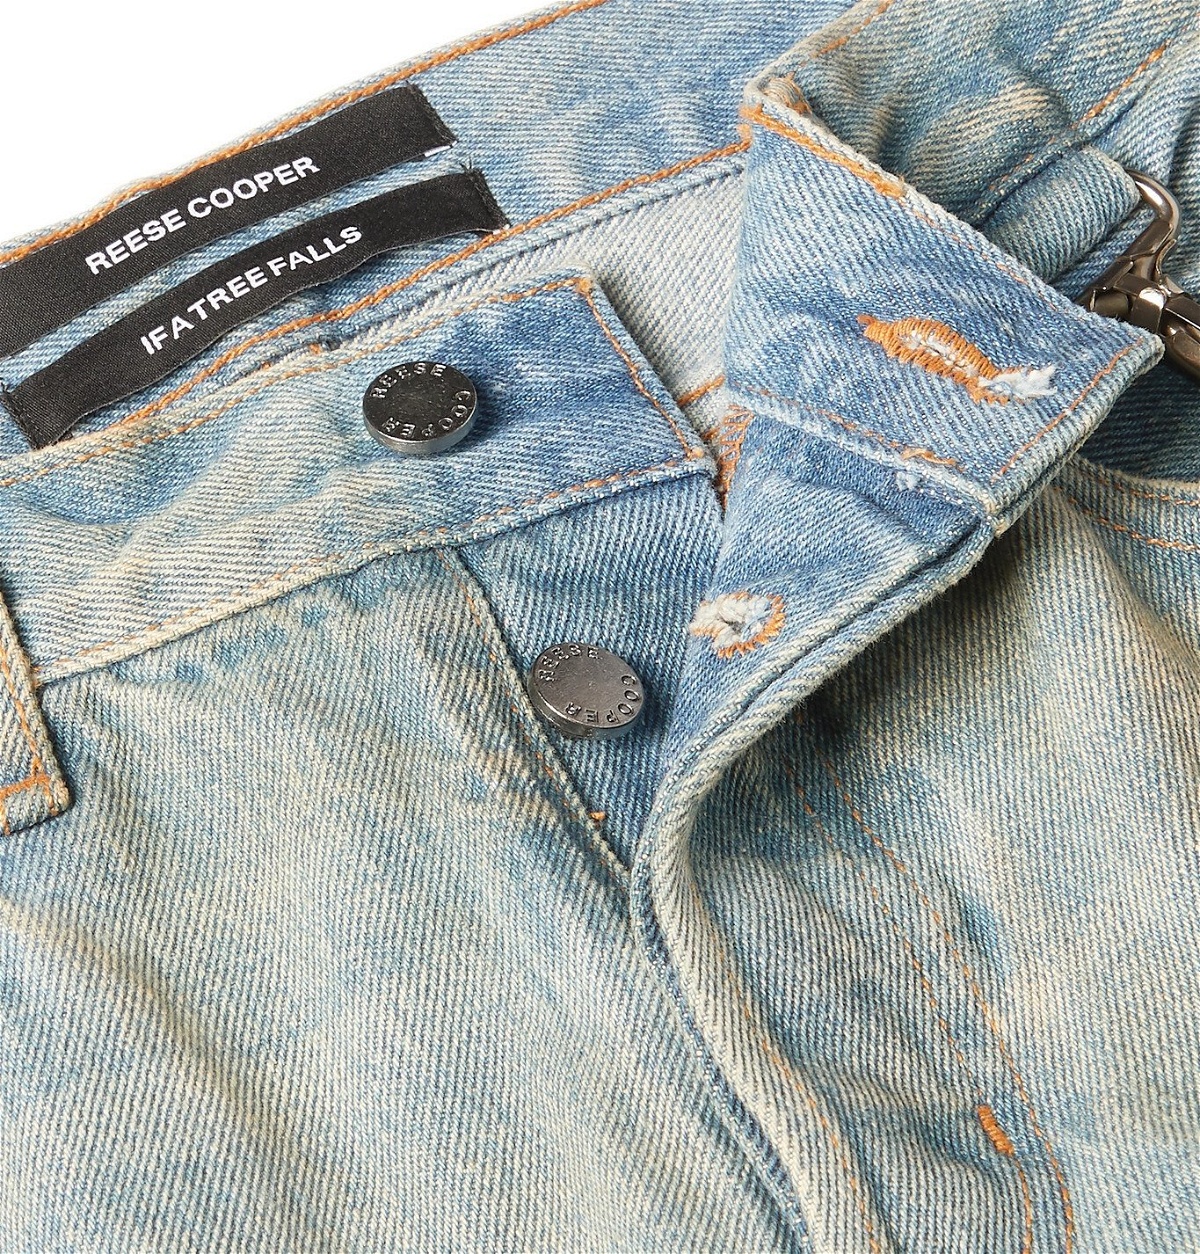 Reese Cooper® - Distressed Patchwork Denim Jeans - Blue Reese Cooper